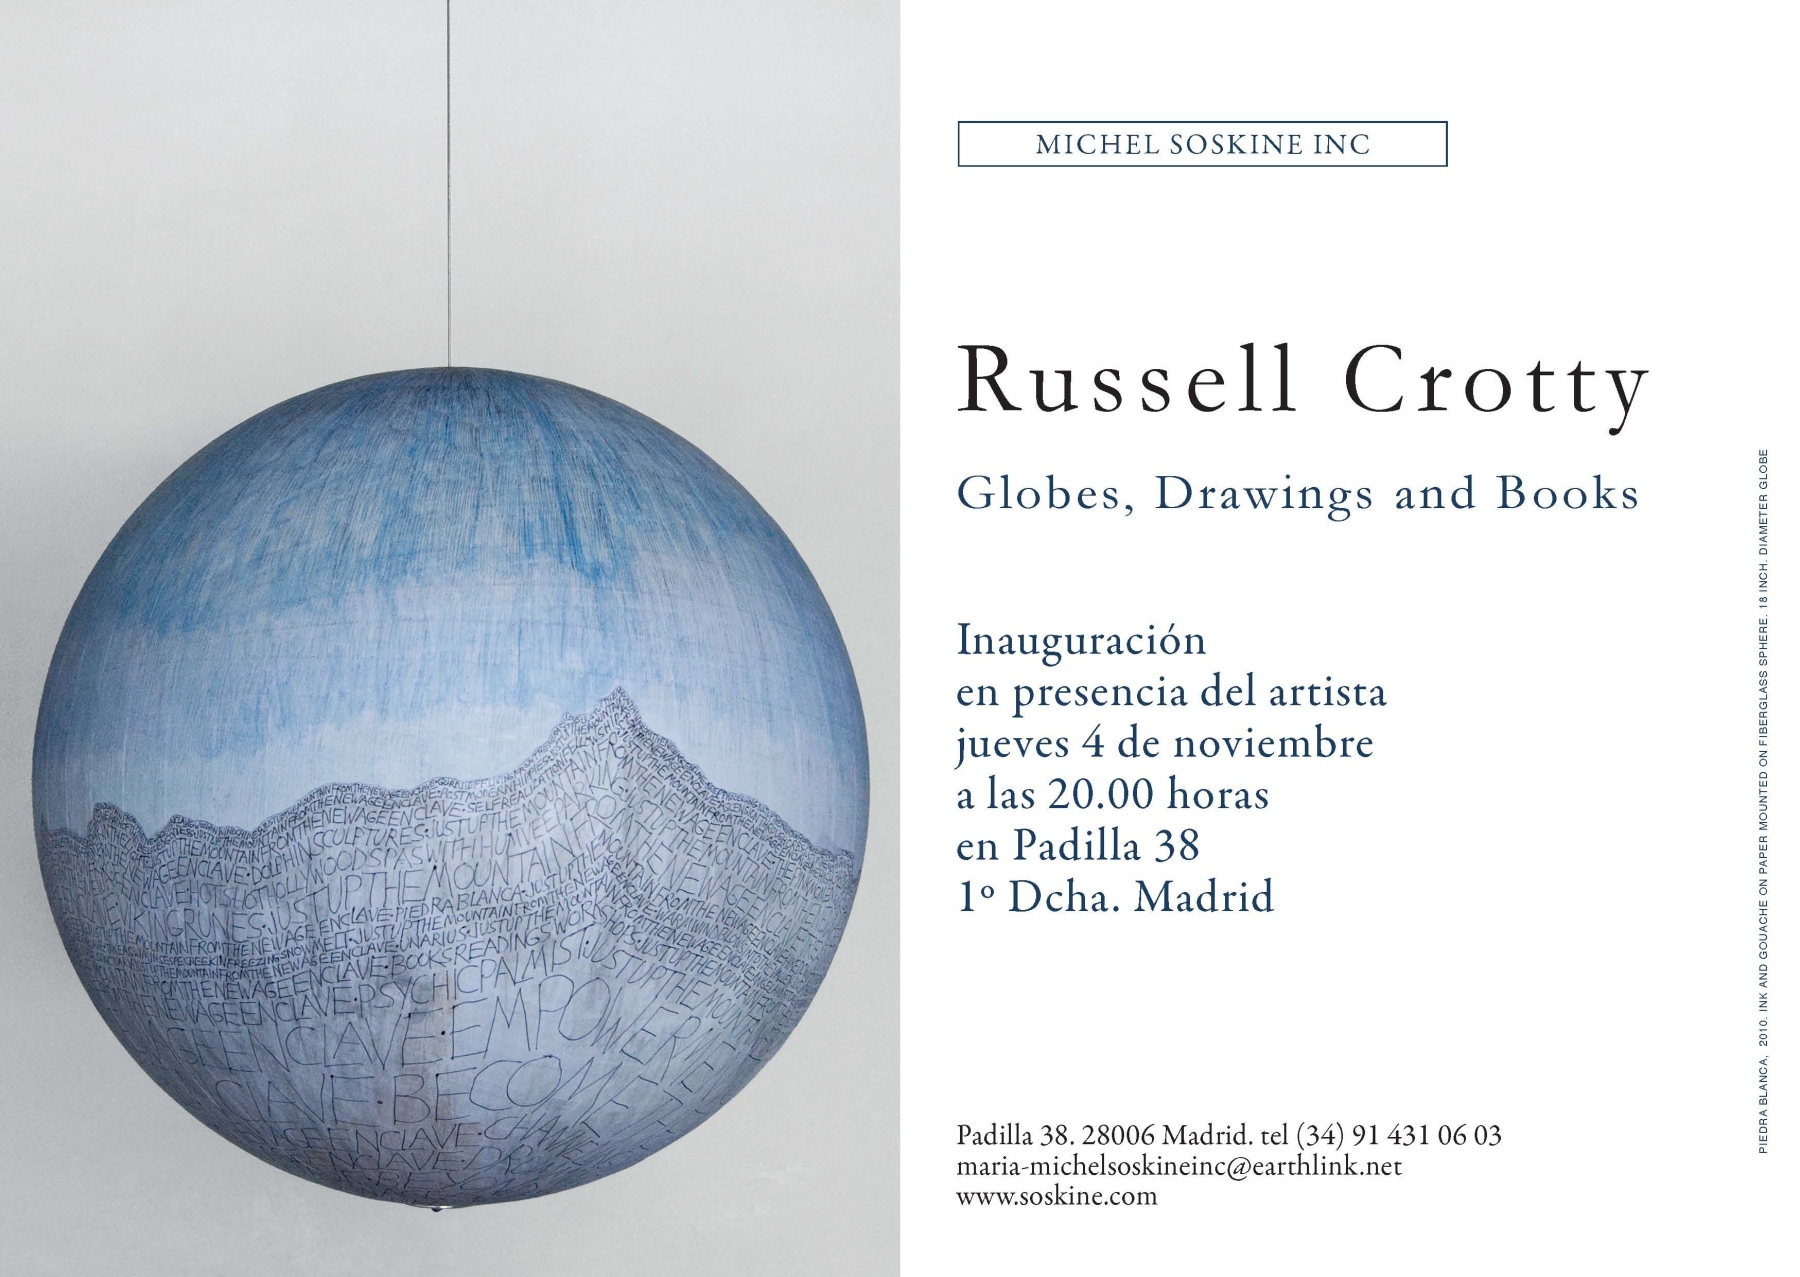 RUSSELL CROTTY